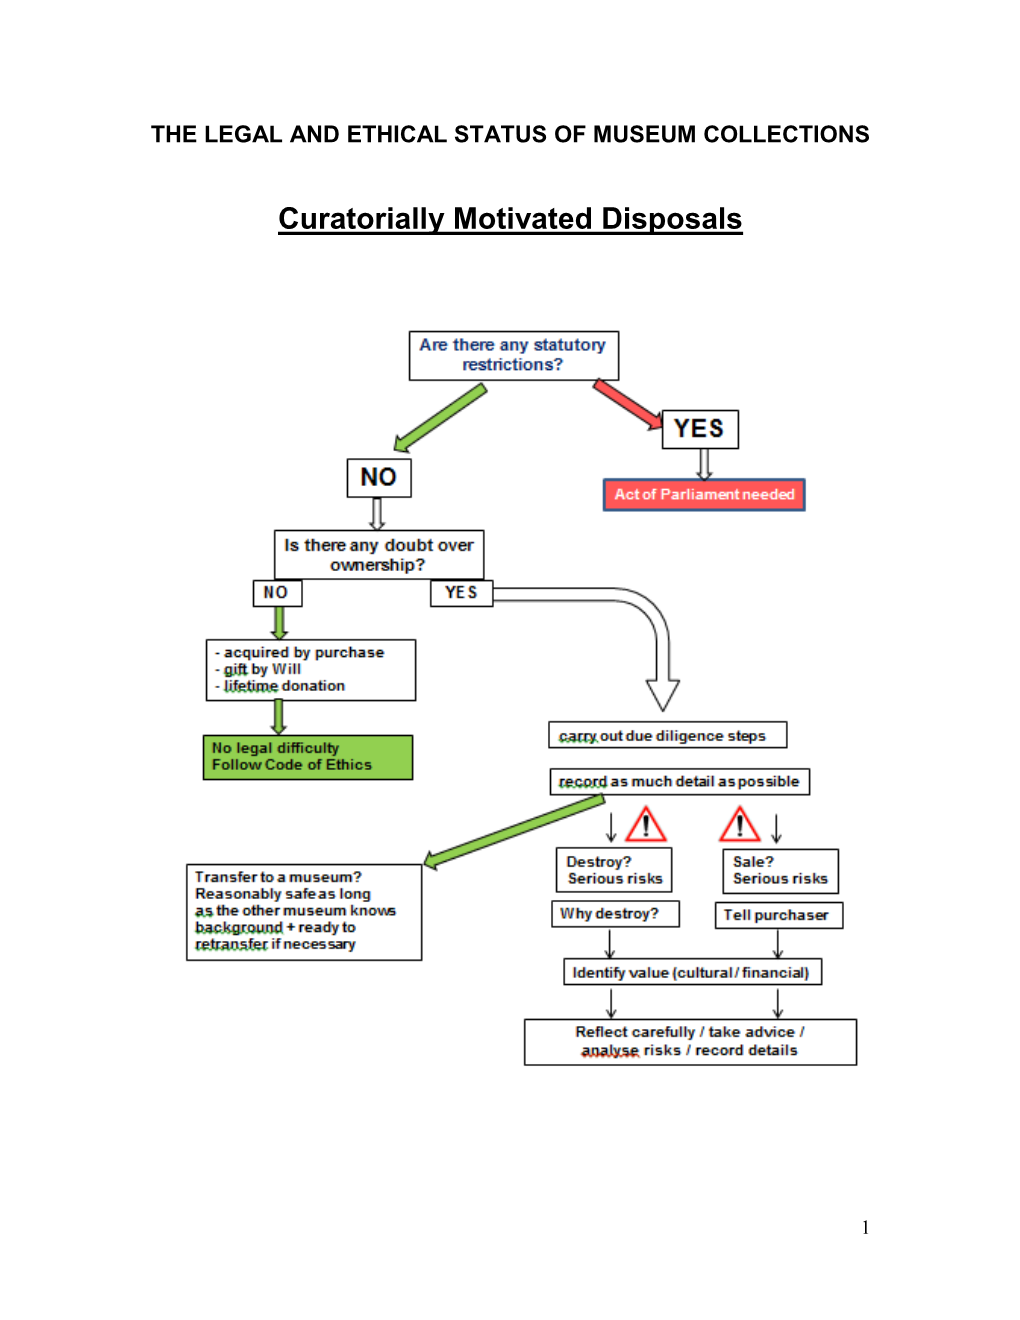 Curatorially Motivated Disposals